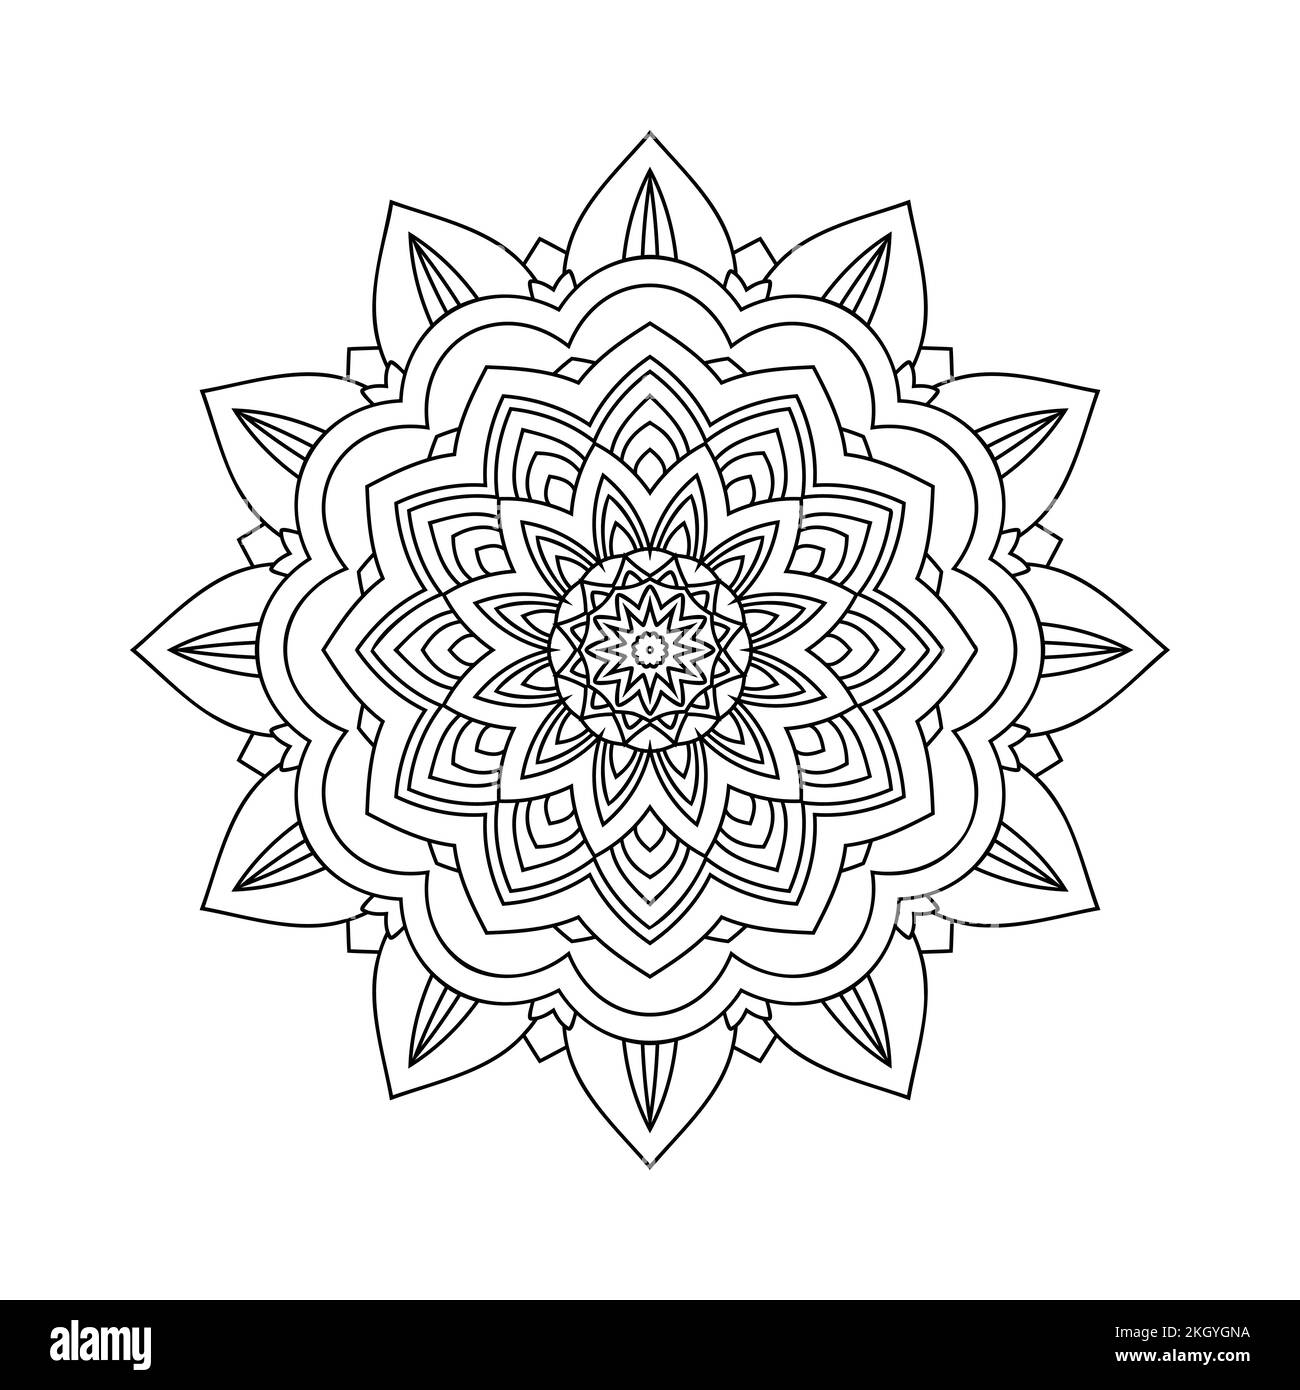 Mandala ornament decoration pattern vector. Black and white mandala coloring pages. Kids coloring page. Circular mandala line art decoration. Arabic s Stock Vector